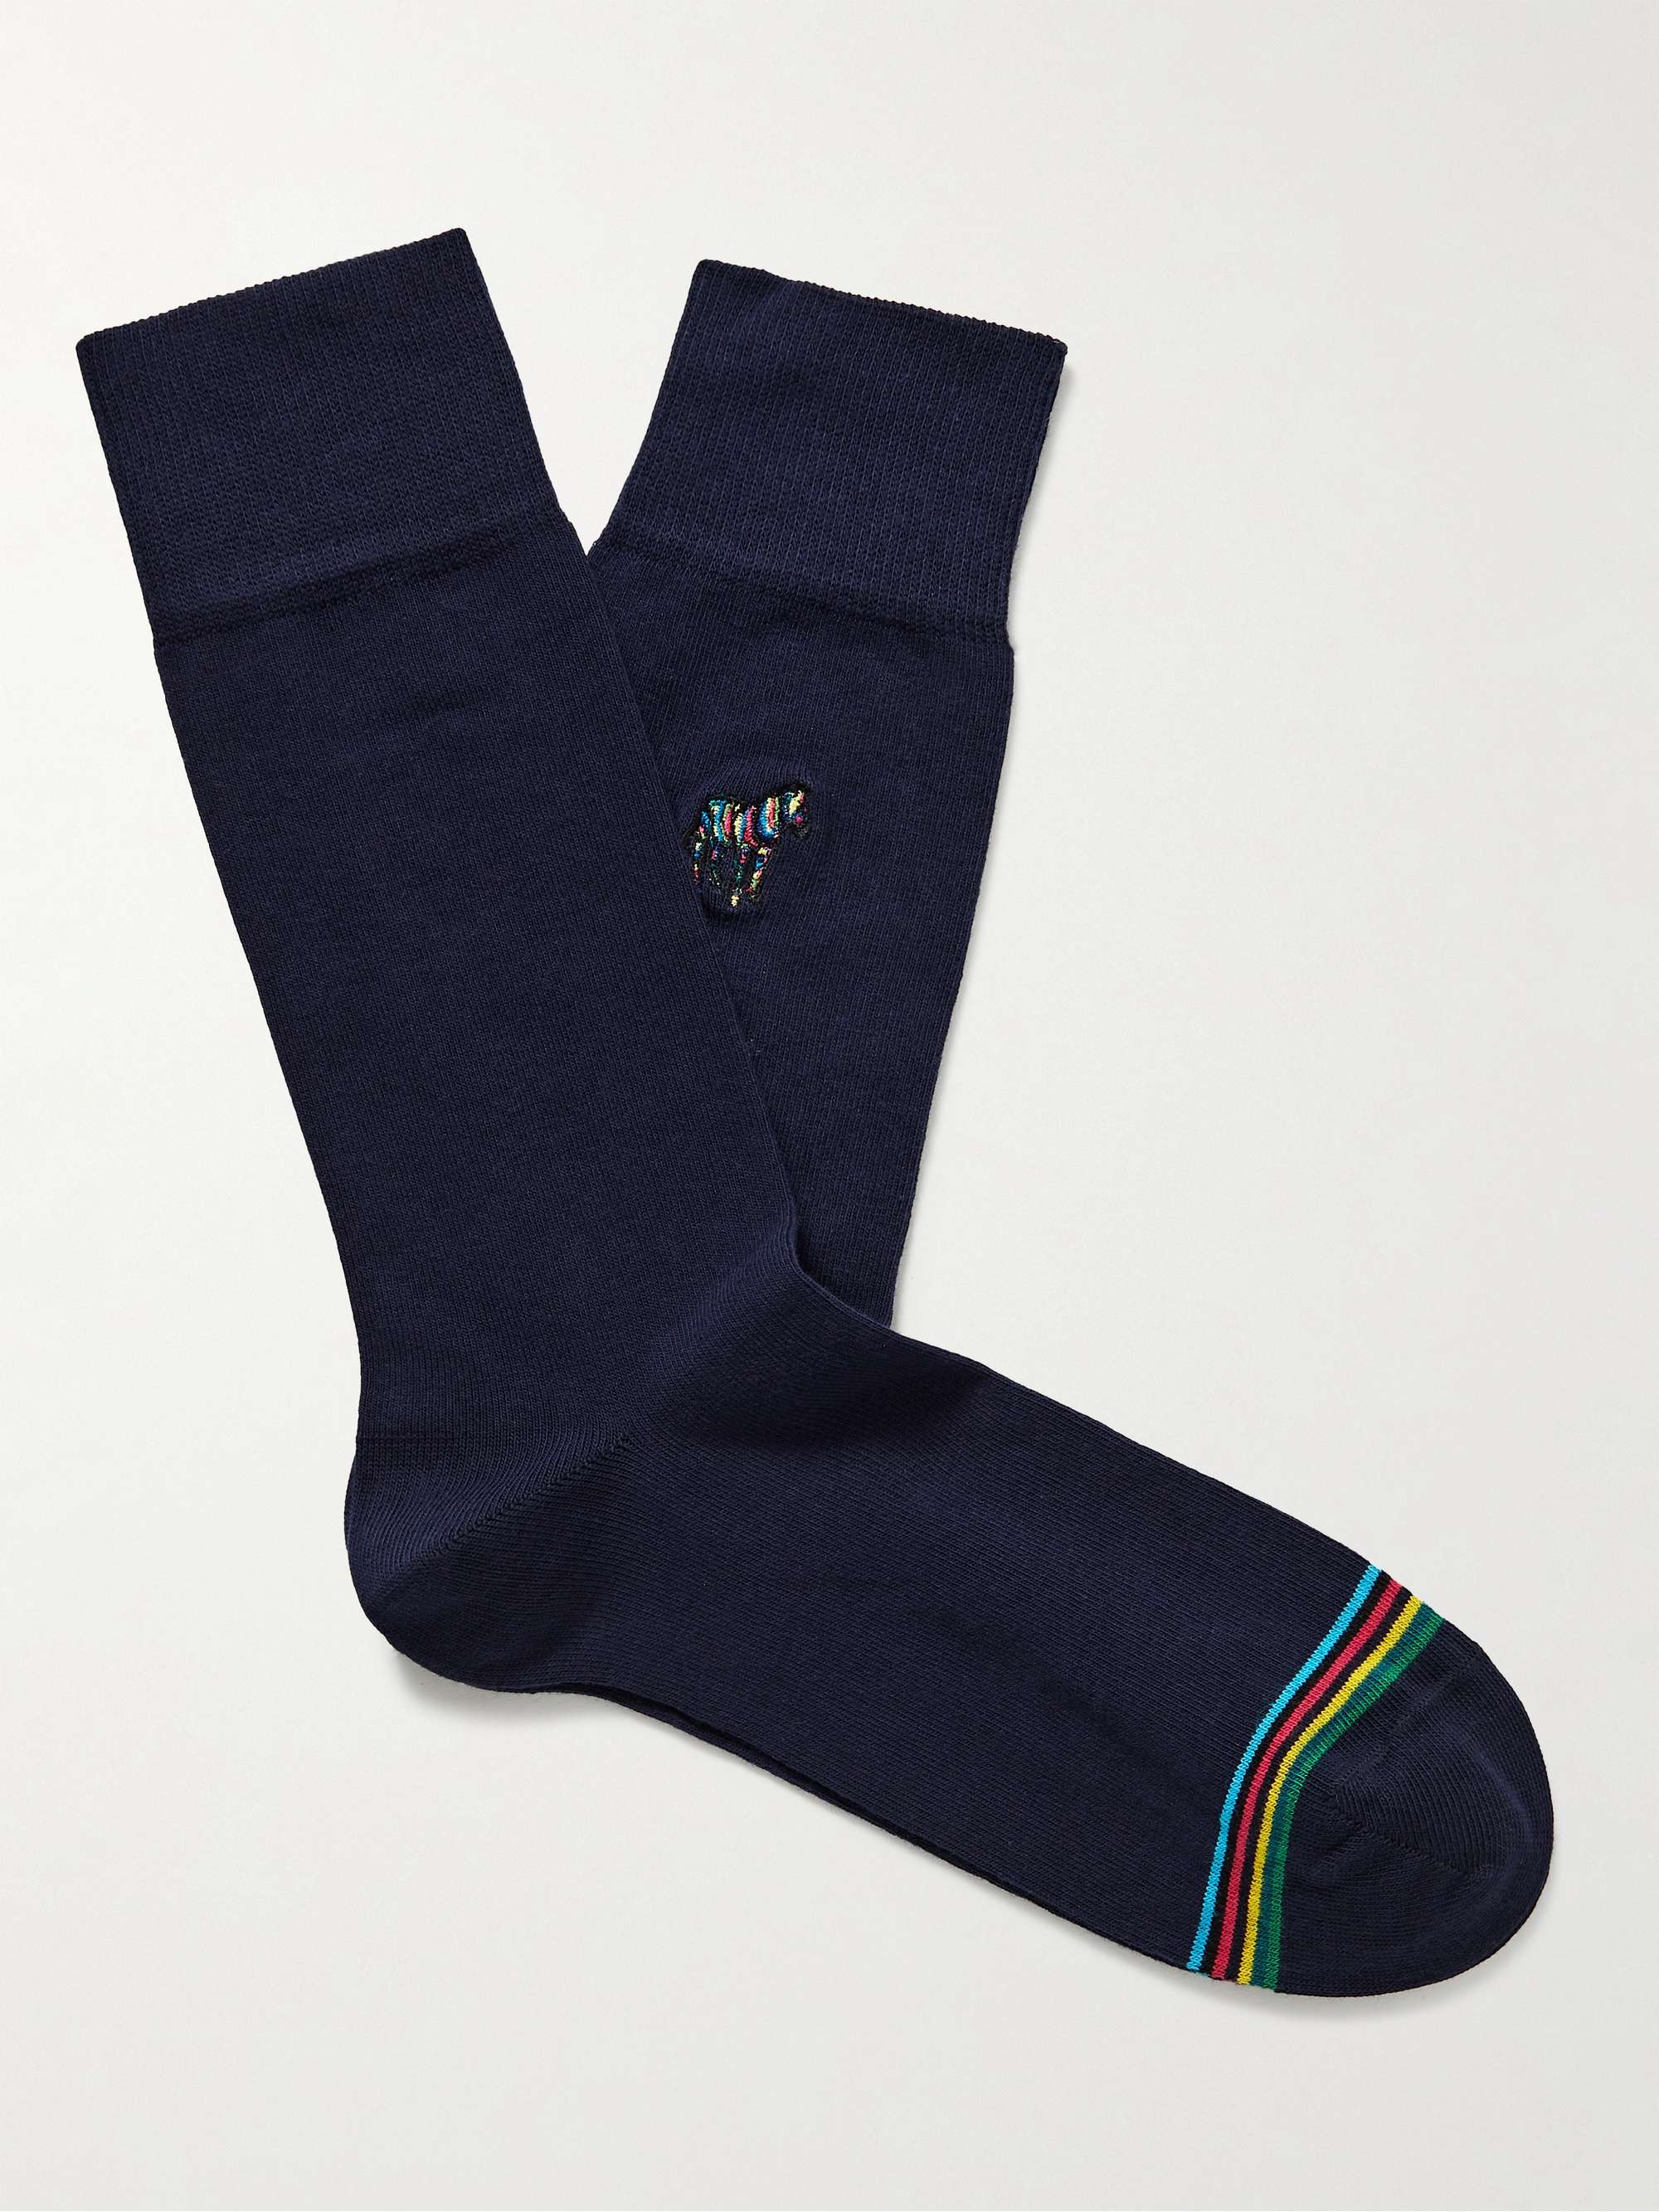 Midnight blue Striped Embroidered Cotton-Blend Socks | PAUL SMITH | MR  PORTER